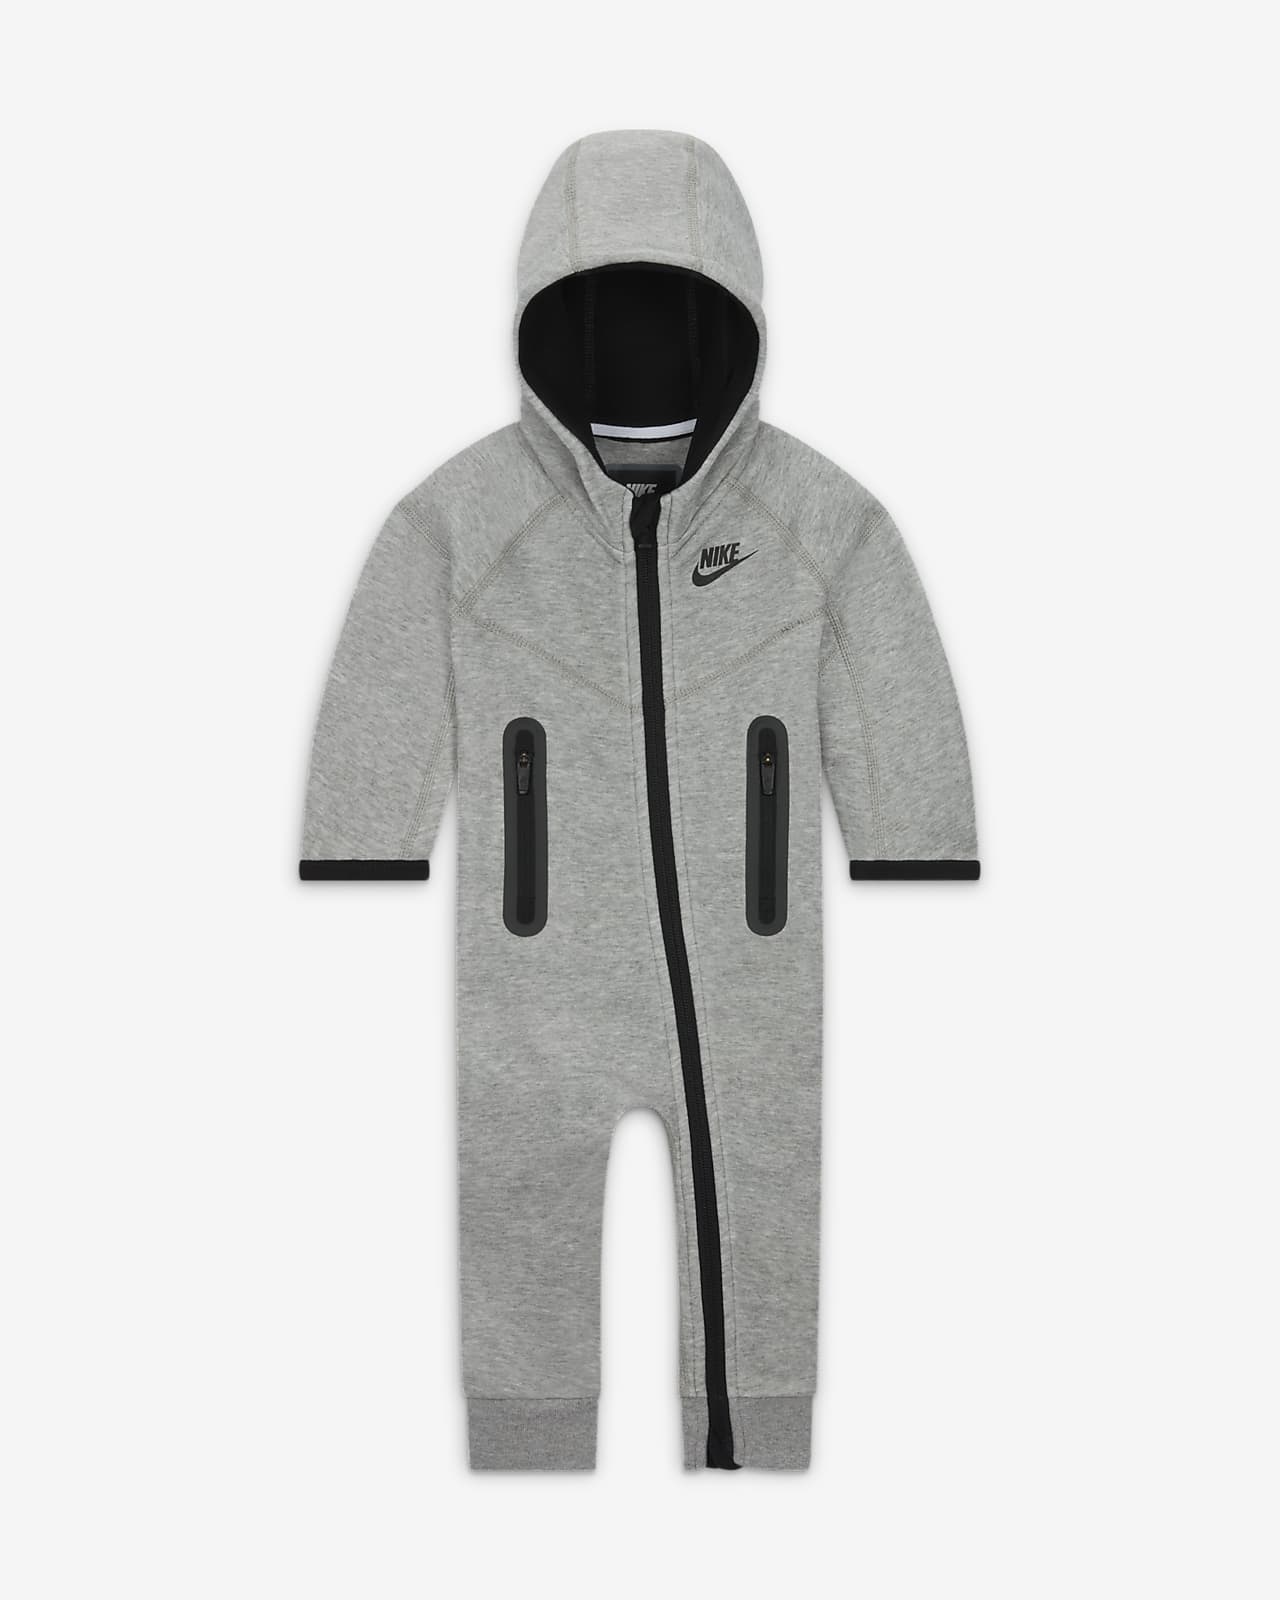 Nike Sportswear Tech Fleece Hooded Coverall Baby Coverall